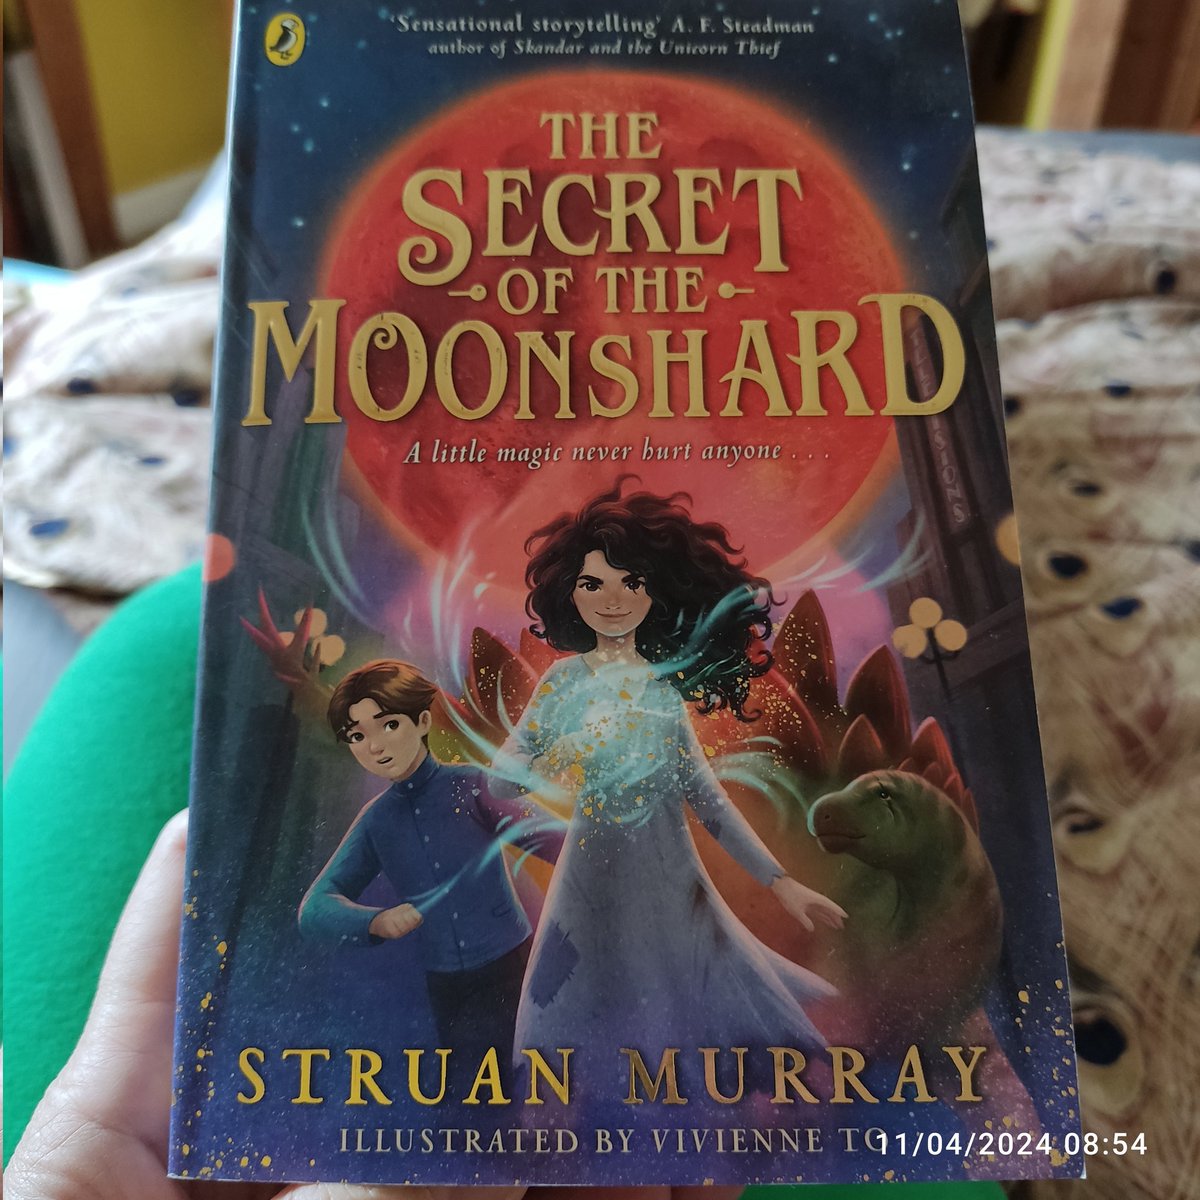 Excited to get stuck into this stunning looking book from @Struan_Murray #TheSecretOfTheMoonshard looks just as amazing as the #OrphansOfTheTide series 🤩 Now just don't disturb me for a couple of days 😉🤣 @PuffinBooks @PenguinUKBooks